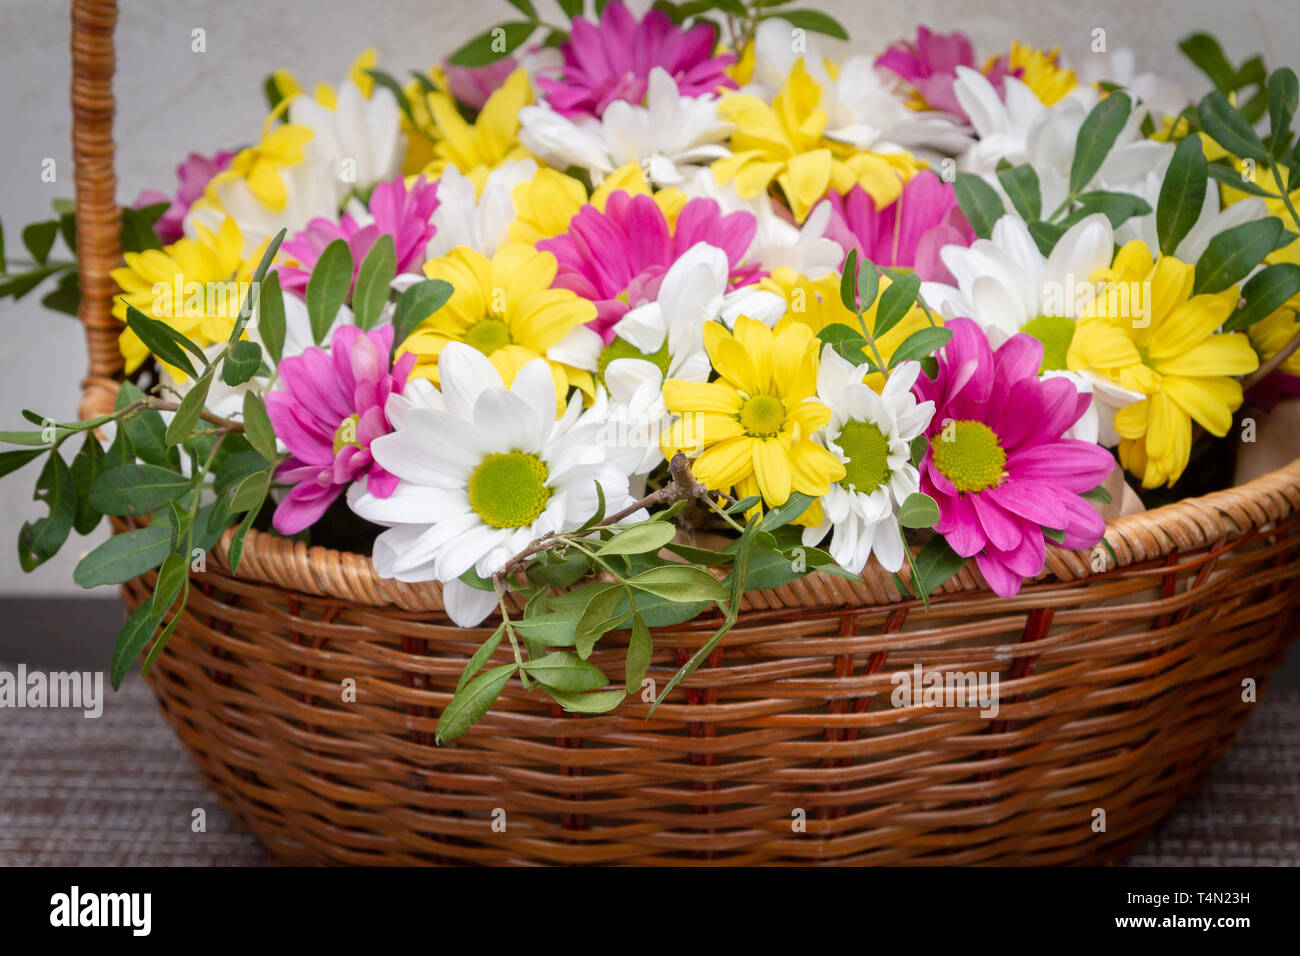 Beautiful Colorful Chrysanthemum Flowers In A Wicker Basket Stock Photo Alamy